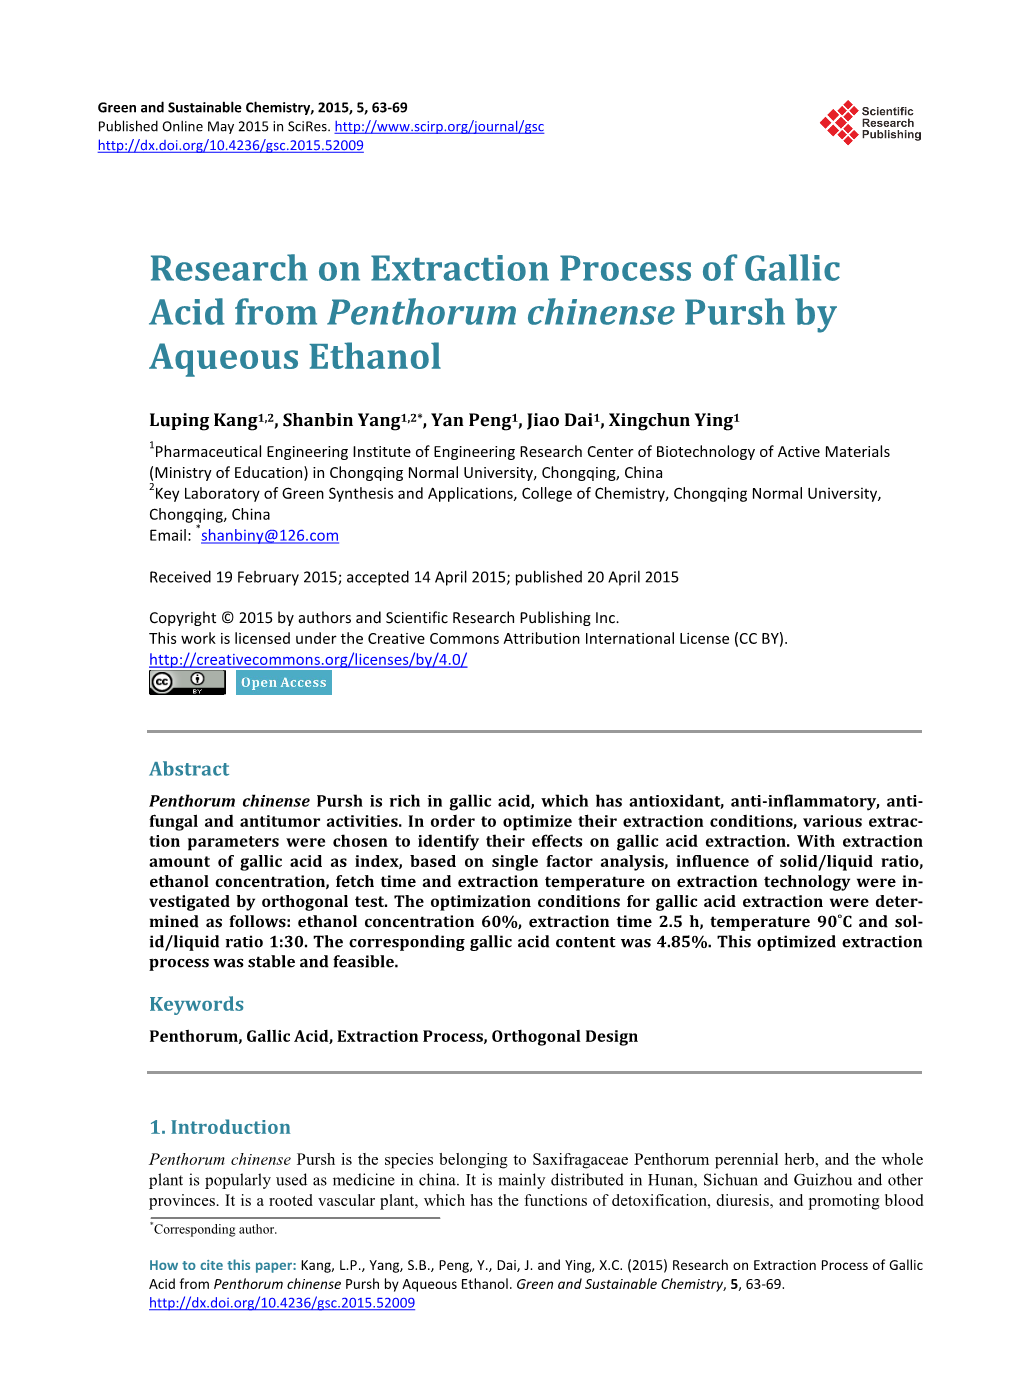 Research on Extraction Process of Gallic Acid from Penthorum Chinense Pursh by Aqueous Ethanol